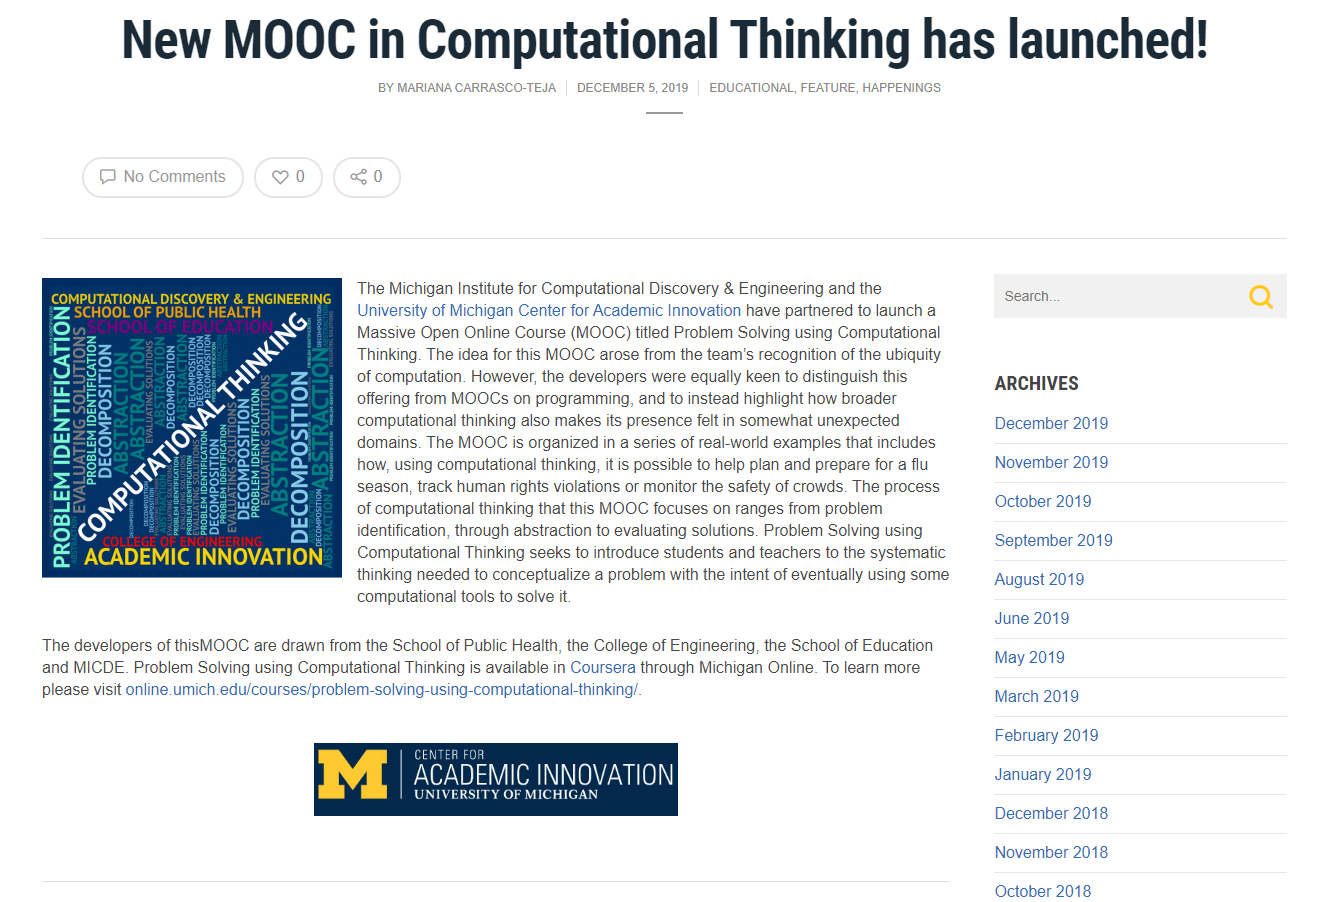 New MOOC in Computational Thinking has Launched!